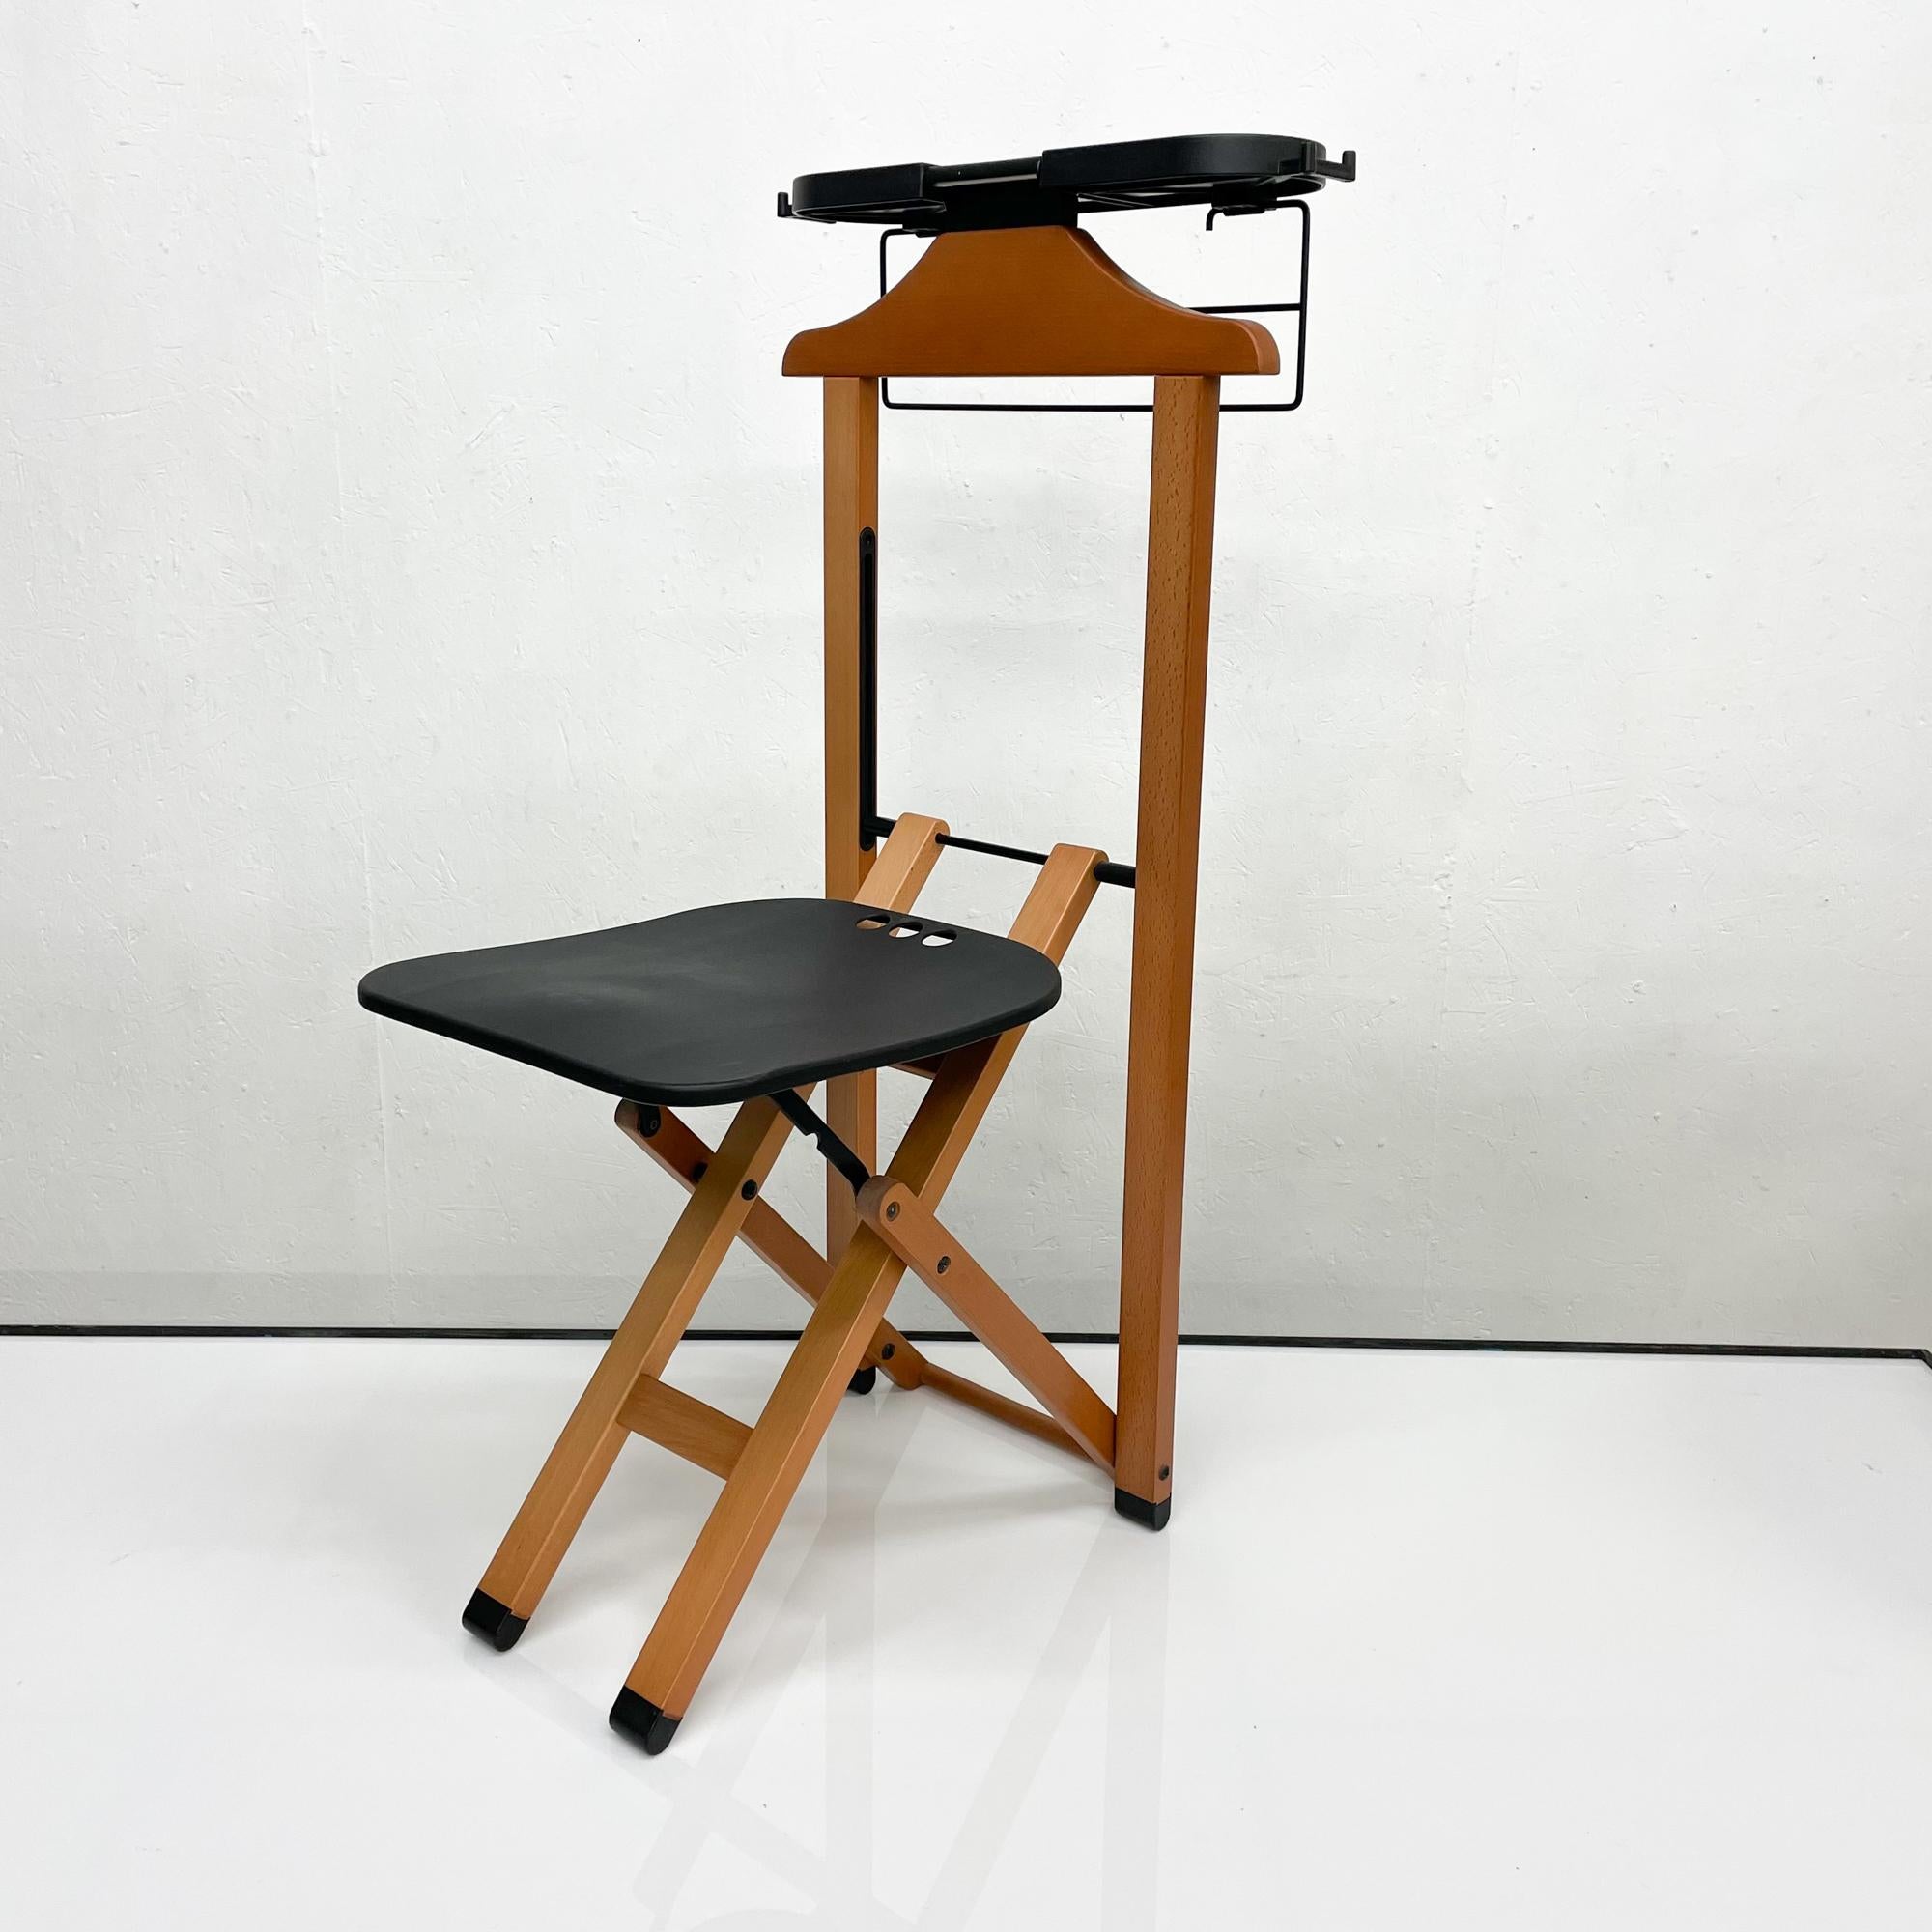 Valet Stand
Modern Italy Foppapedretti Gentleman's Folding Valet with Chair.
Amazing design with a chair and valet included. The chair can be folded into a very practical rectangular shape which takes up hardly any space. 
Very good vintage